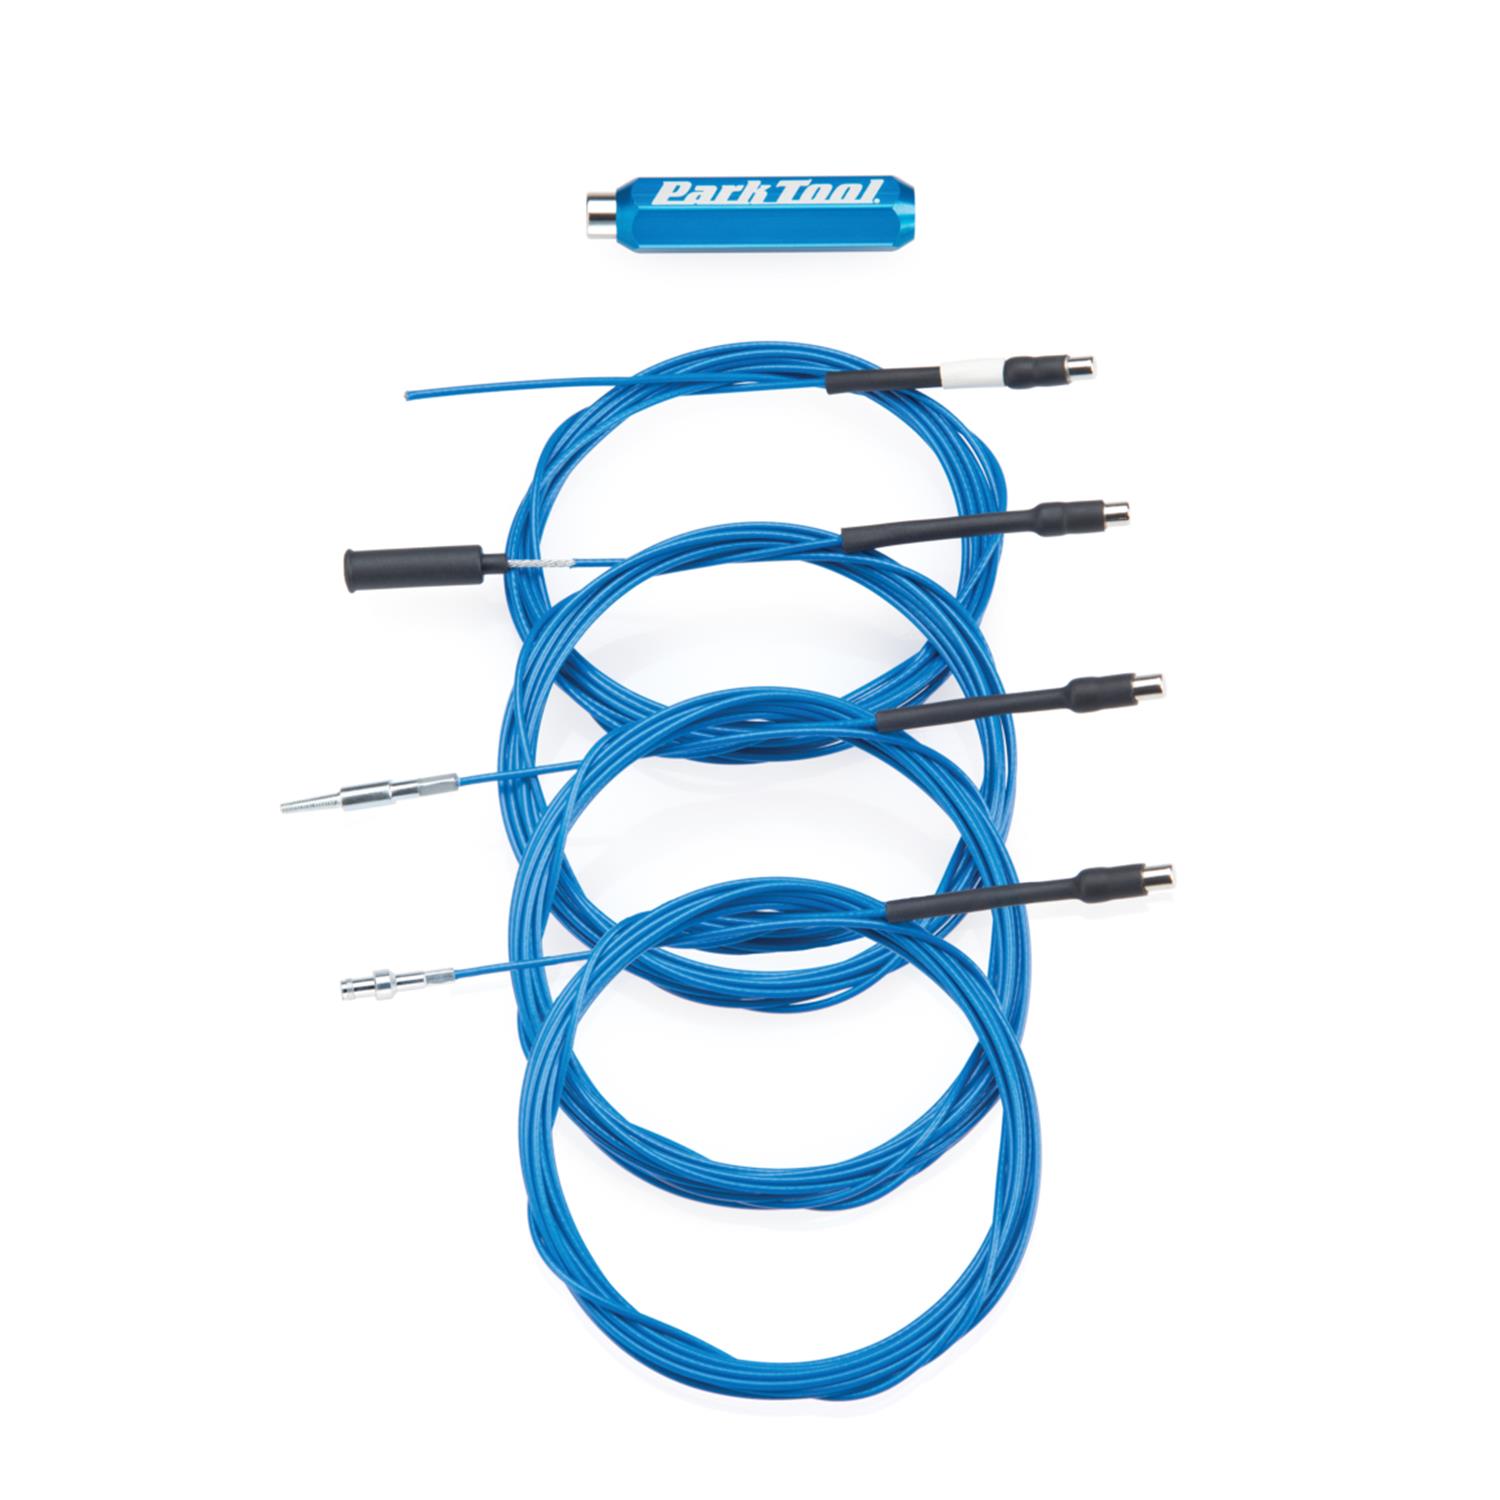 INTERNAL CABLE ROUTING KIT